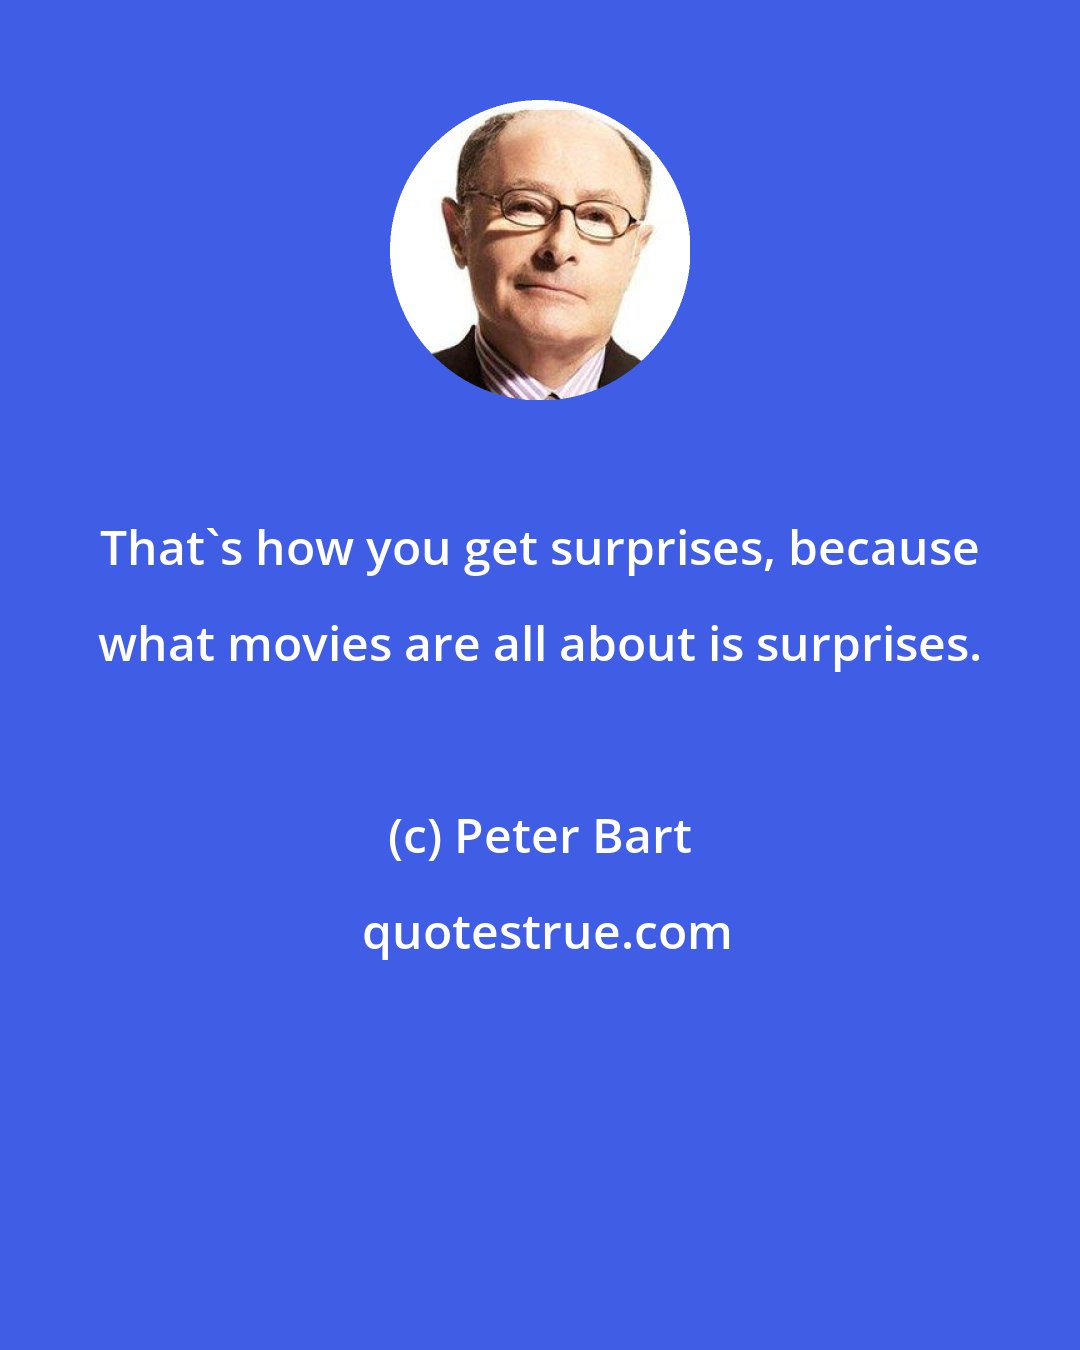 Peter Bart: That's how you get surprises, because what movies are all about is surprises.